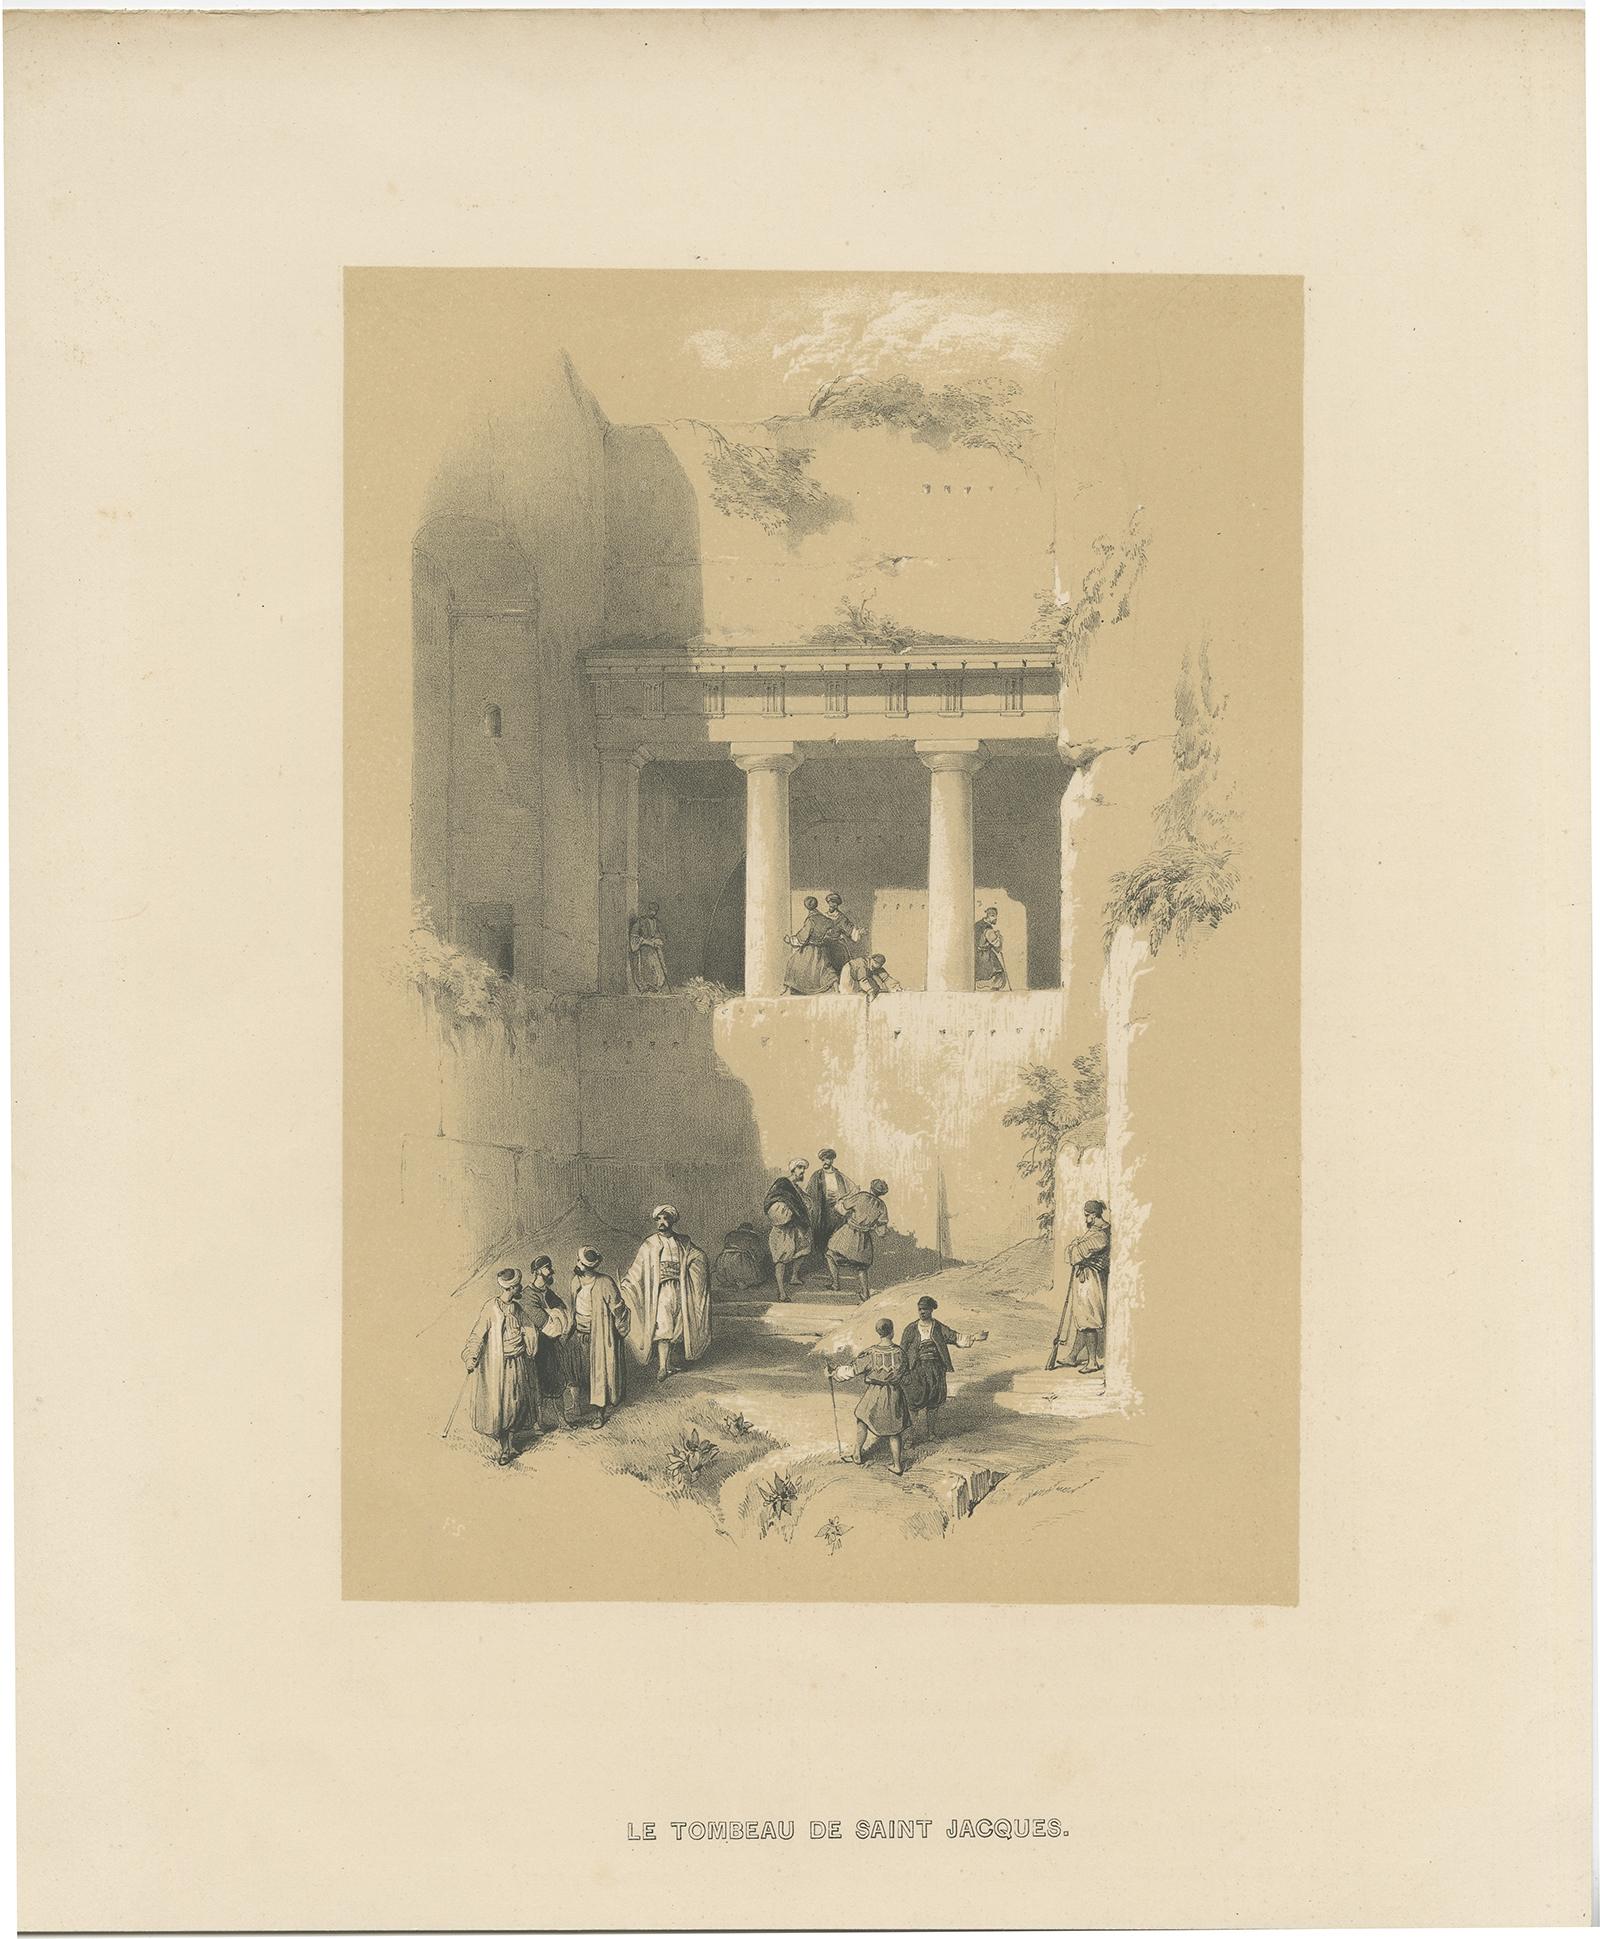 Antique print titled 'Le Tombeau de Saint Jacques'. Old print of Tomb of Jacob, Israel. Made after the designs of the reknown David Roberts.

Artists and Engravers: Anonymous.